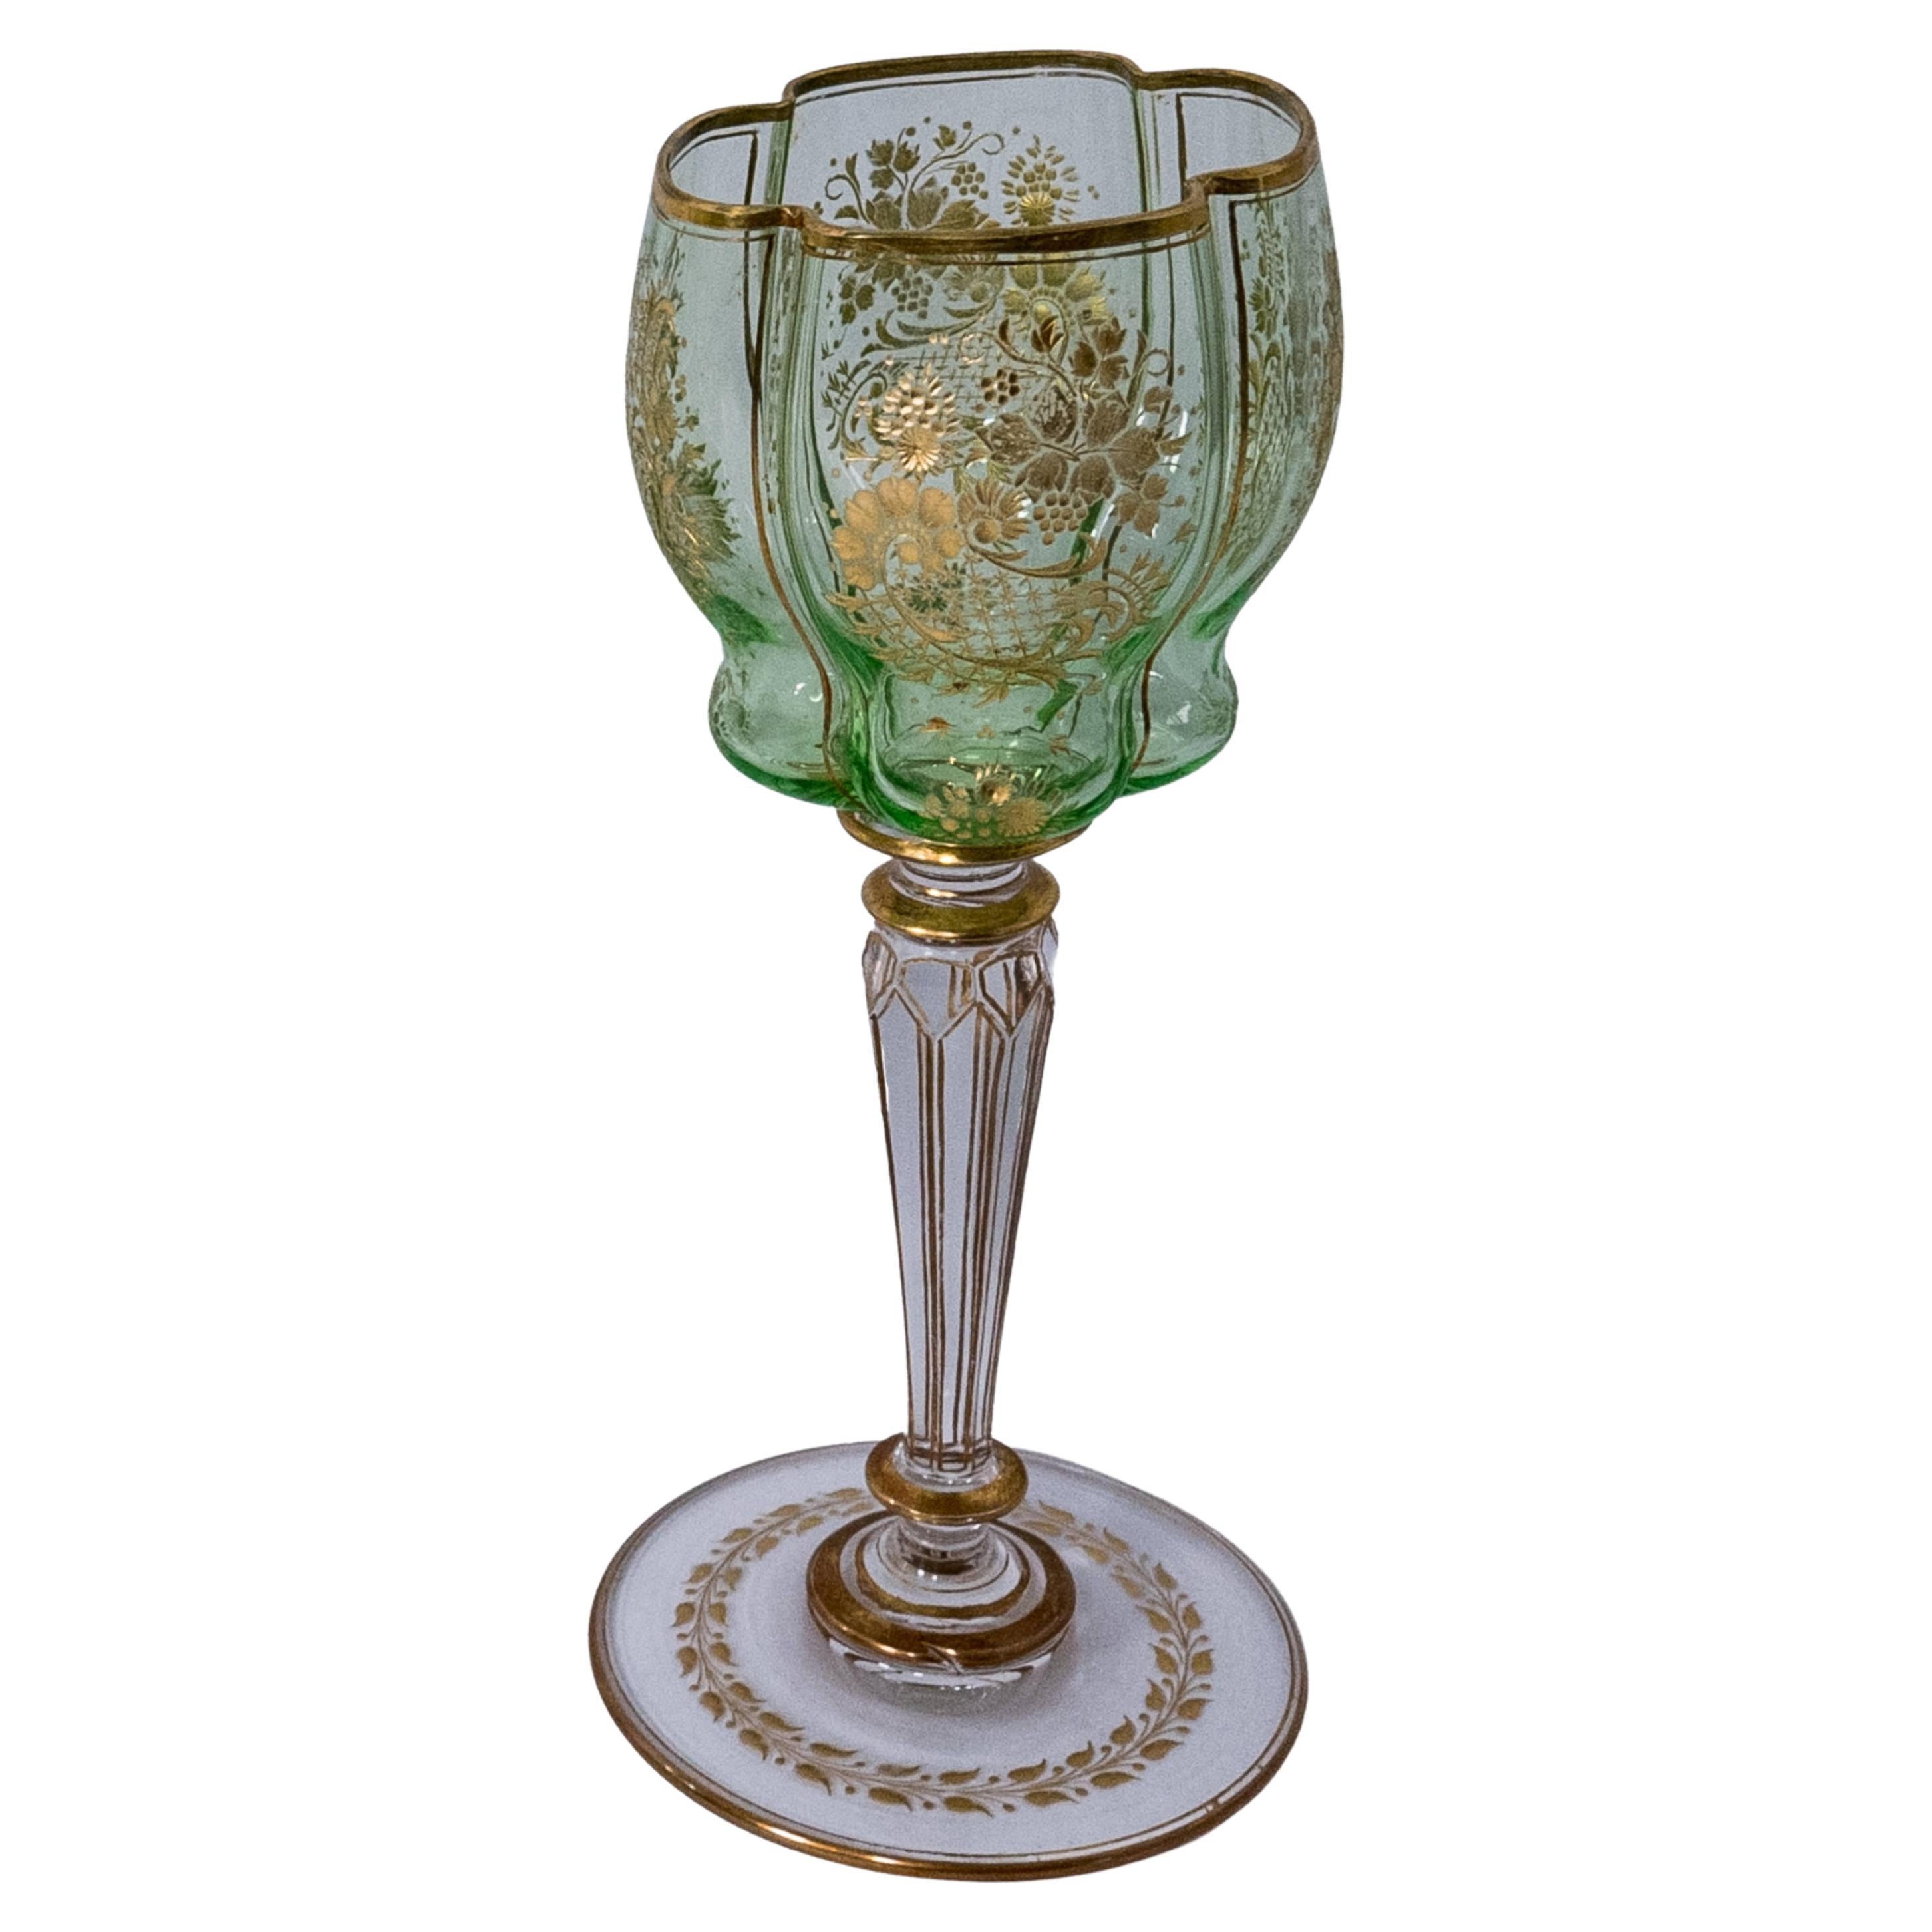 10 Antique Moser Green Cut and Gilt Wine Goblets, circa 1880